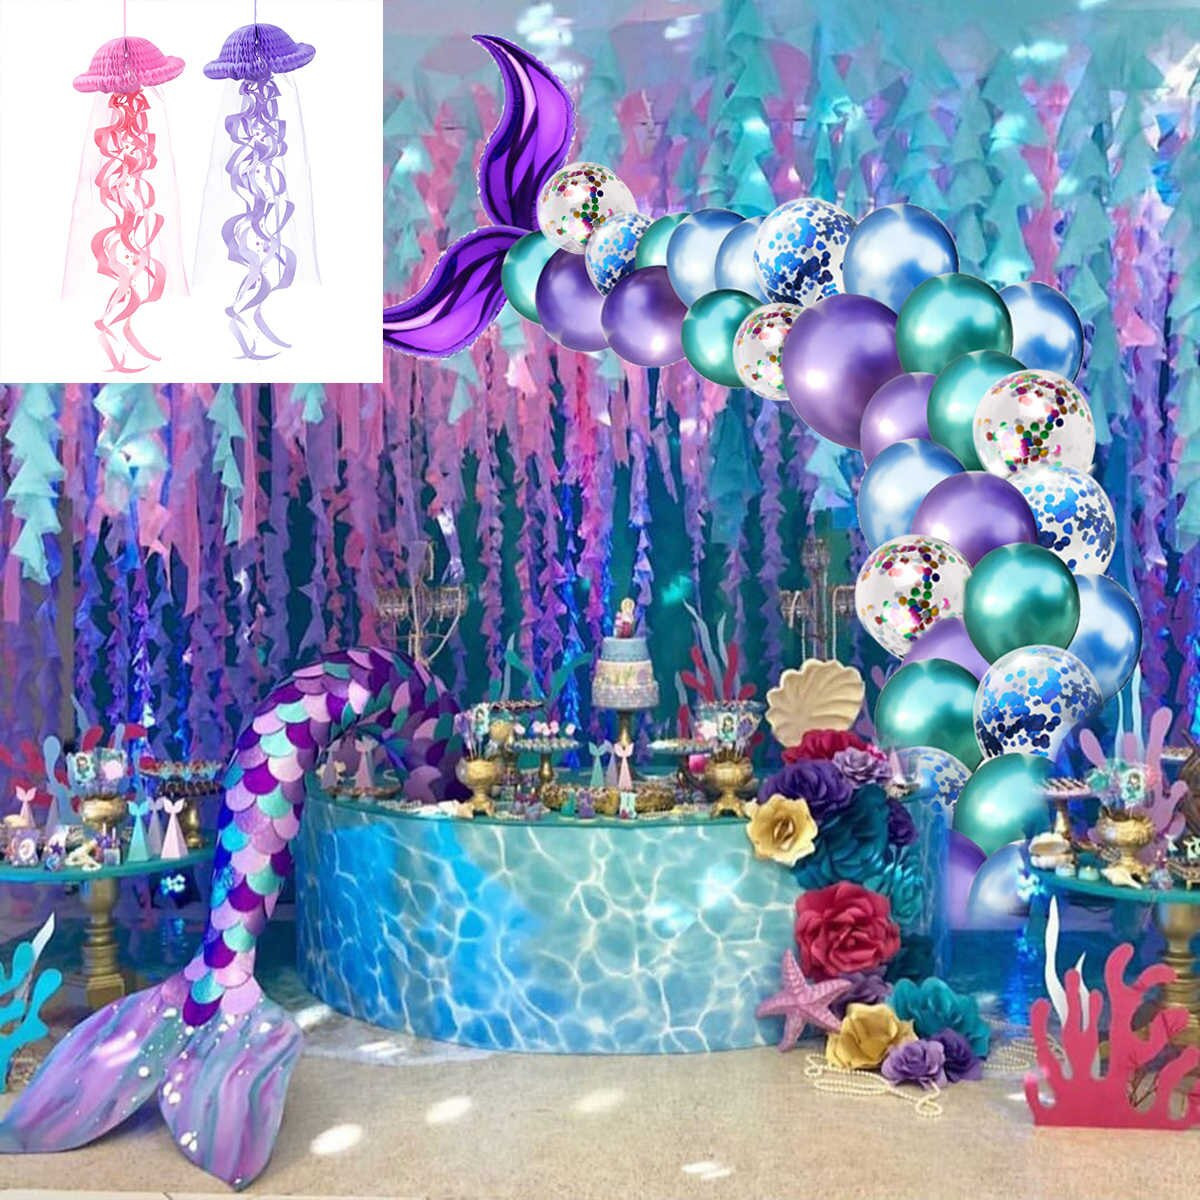 Little Mermaid Birthday Party Decorations
 HUIRAN Romantic Little Mermaid Party Supplies Mermaid